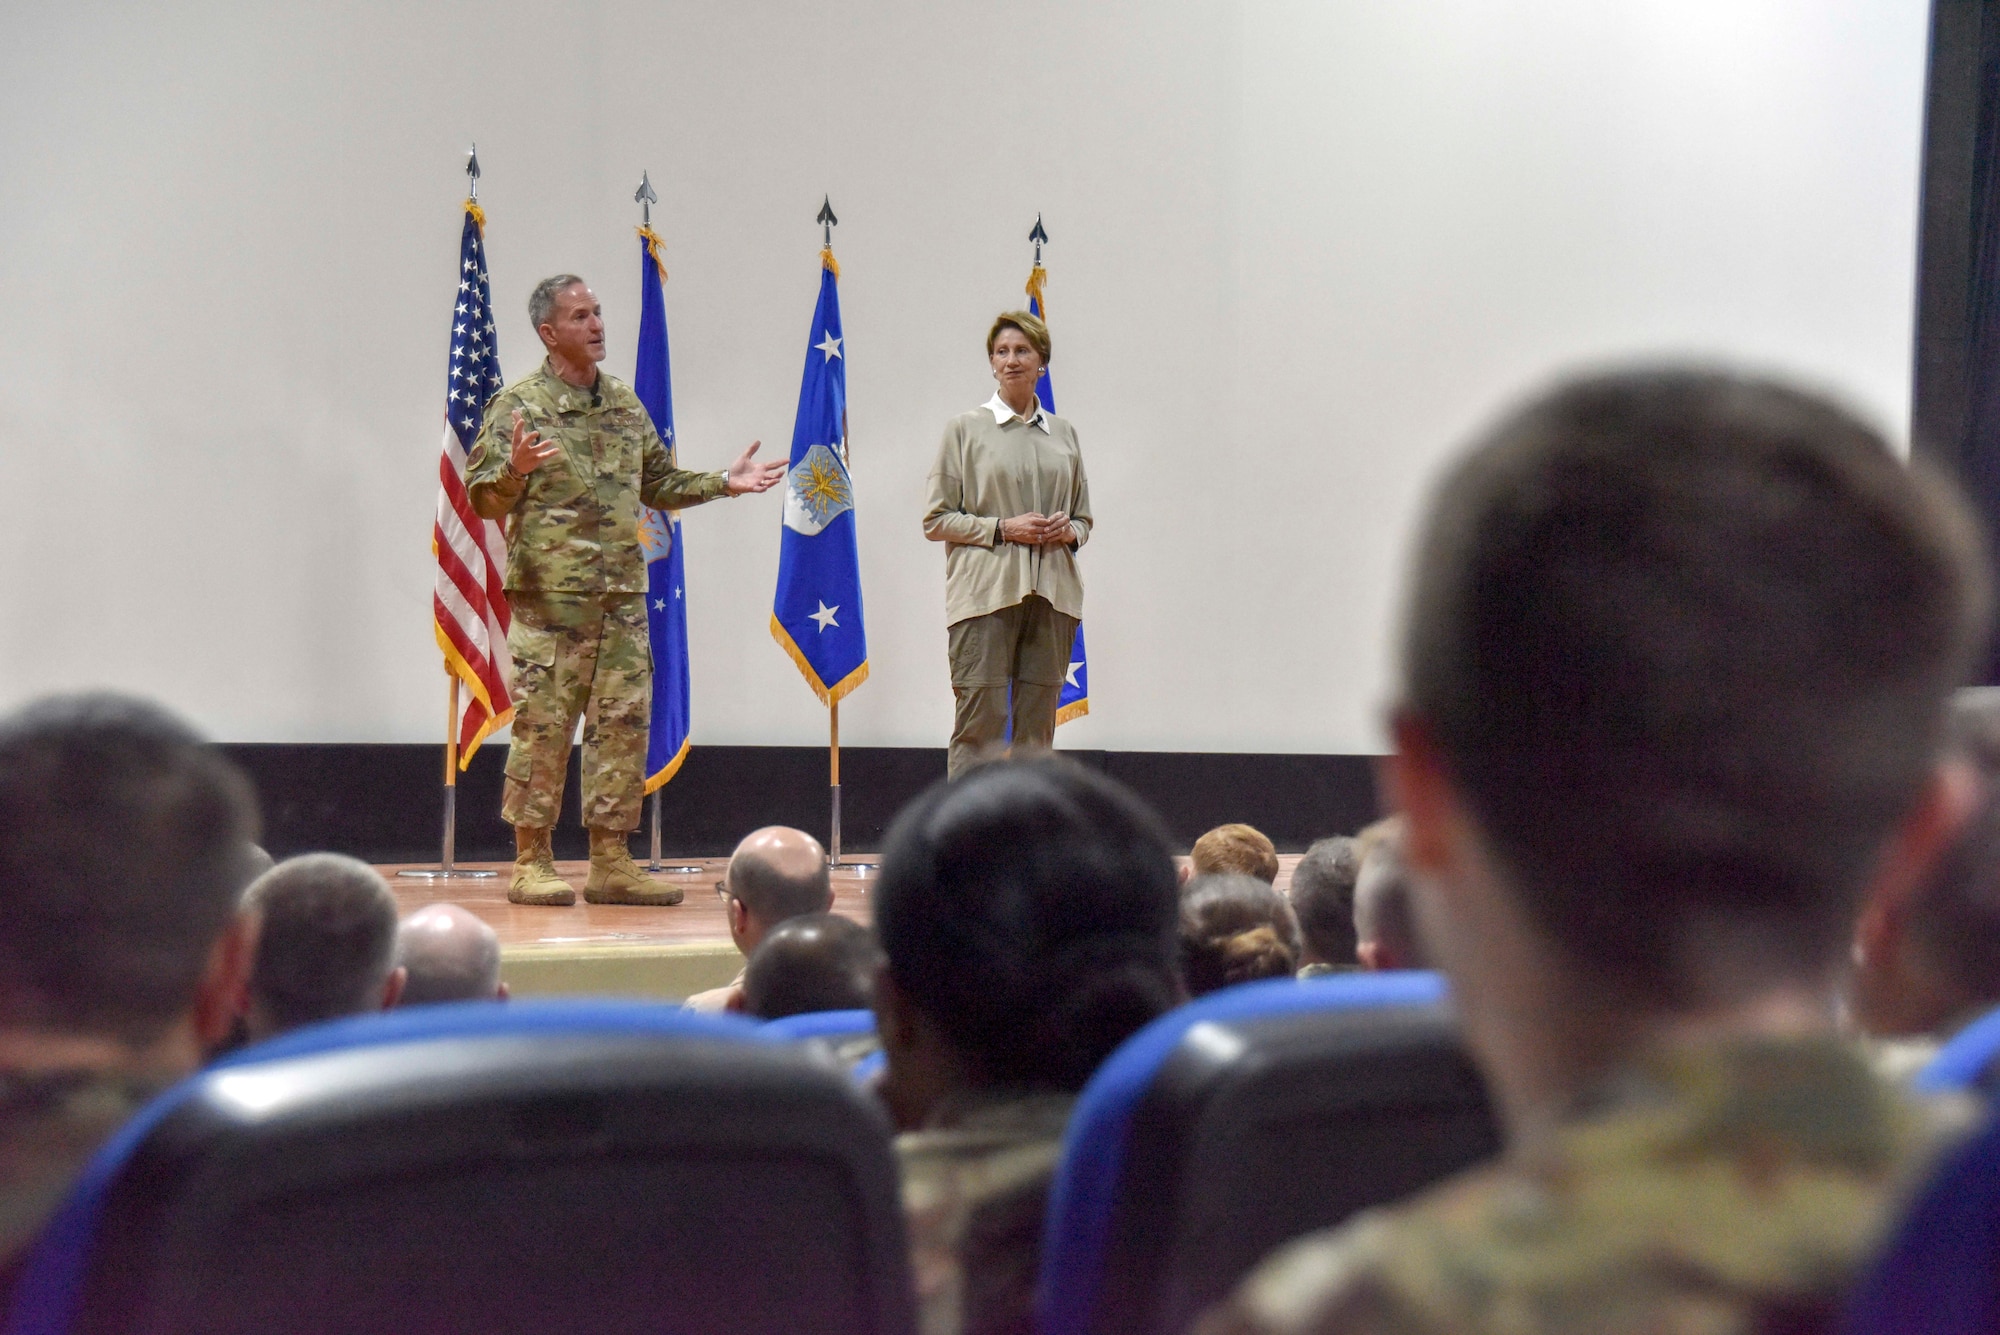 Secretary of the Air Force Barbara Barrett and Air Force Chief of Staff Gen. David L. Goldfein speak to Airmen during an all-call at Al Udeid Air Base, Qatar on Nov. 18, 2019. During the all-call, Barrett and Goldfein spoke to readiness, lethality and the future of the U.S. Air Force. During their visit the Air Force leaders also met with AUAB and Qatari leadership, and visited Airmen and the facilities where they work and live. (U.S. Air Force photo by Tech. Sgt. John Wilkes)